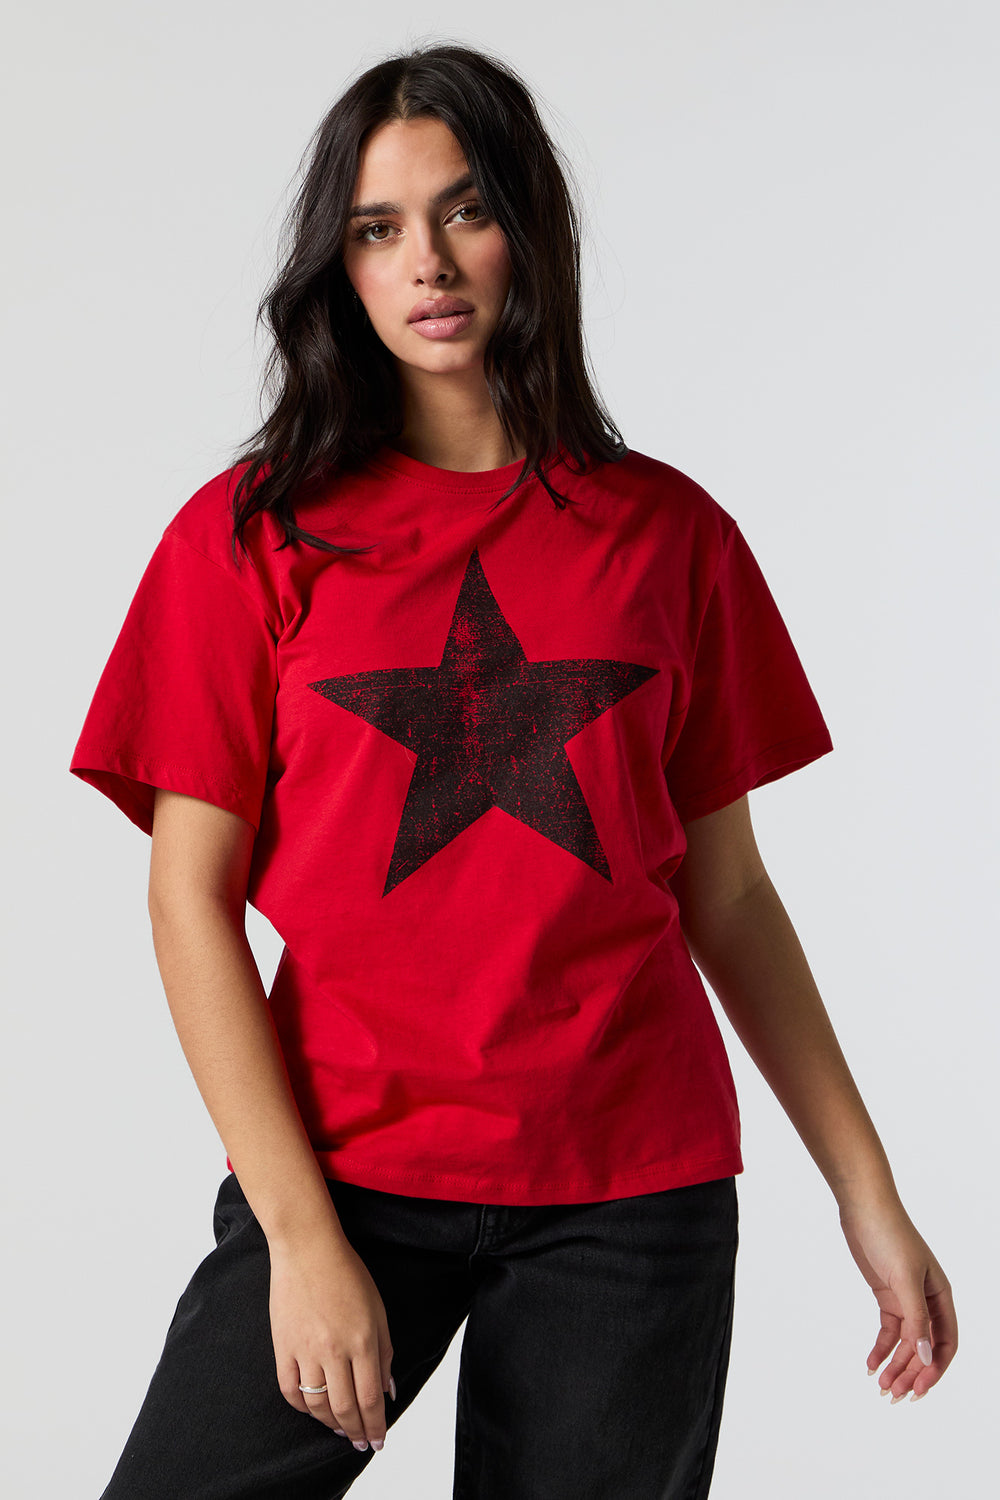 Distressed Star Graphic T-Shirt Distressed Star Graphic T-Shirt 2